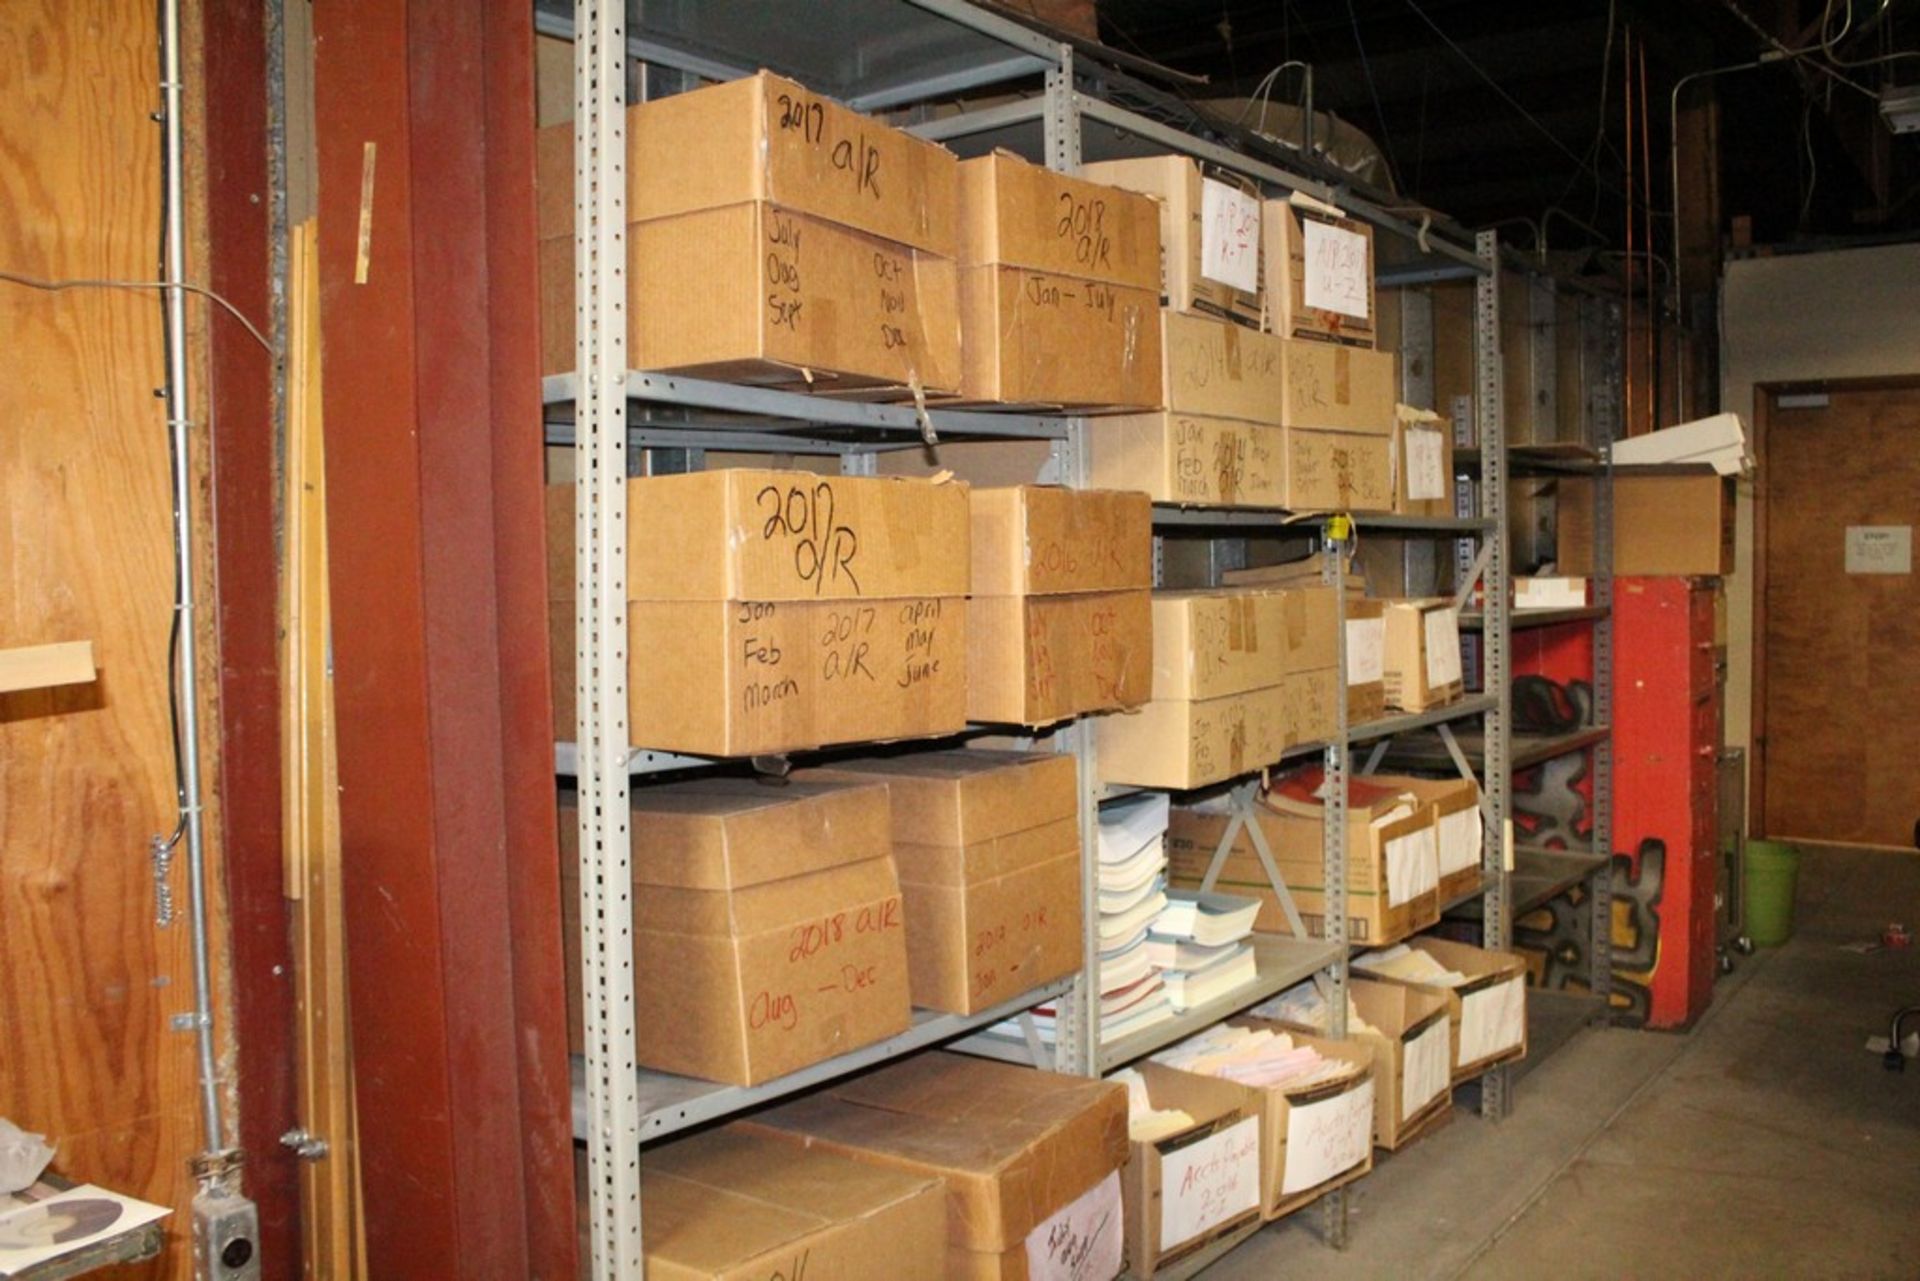 (3) SECTIONS STEEL SHELVING, EACH 36" X 24" X 7' H